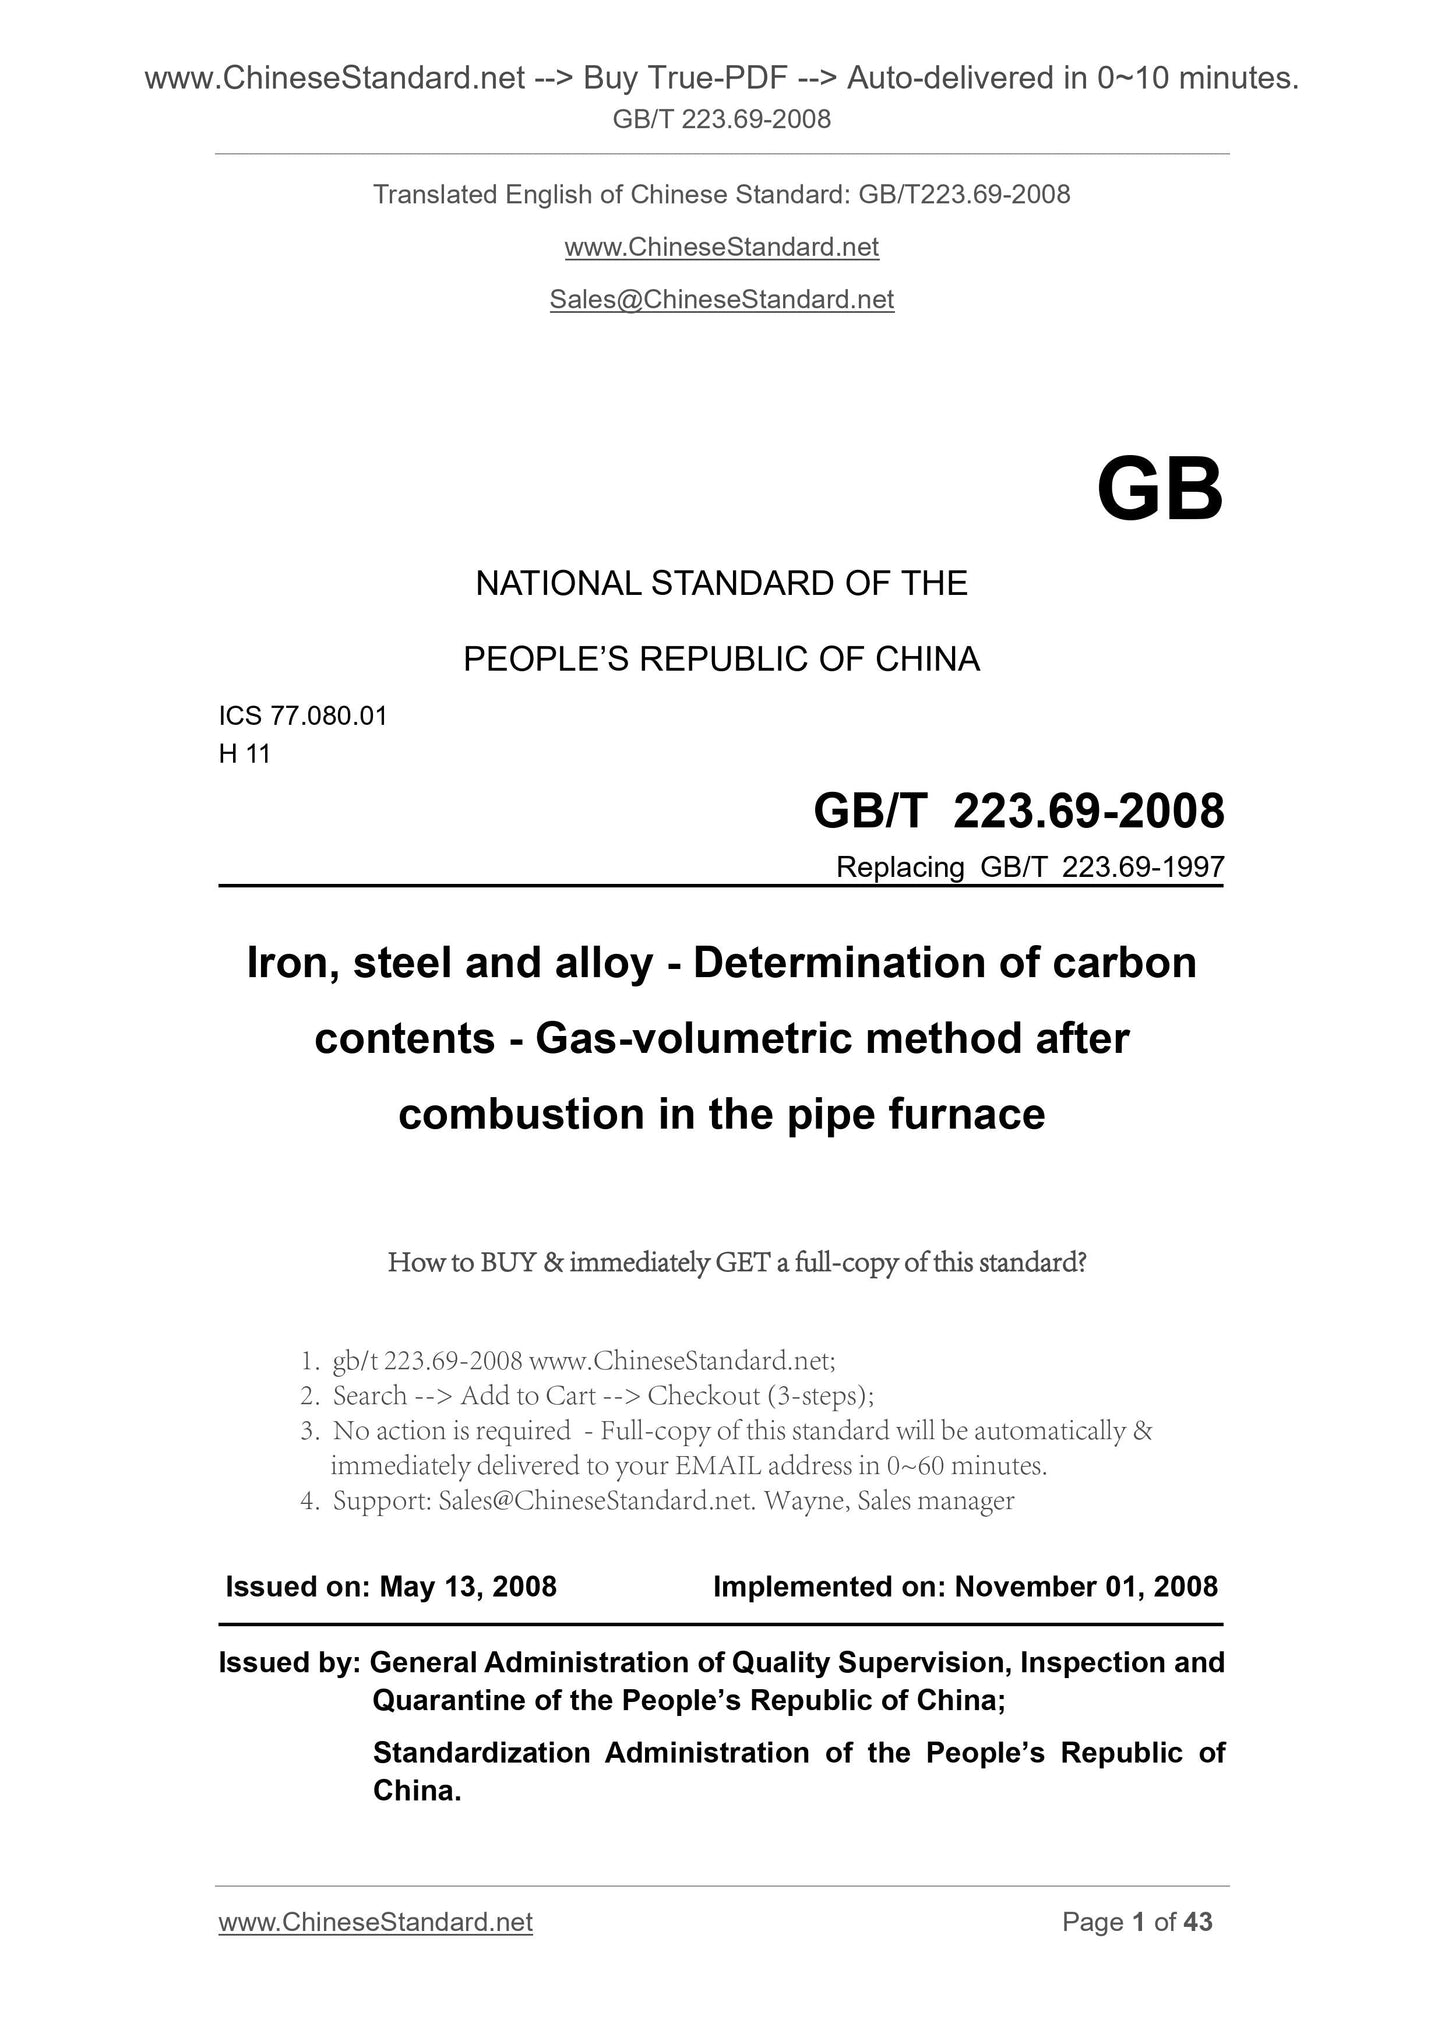 GB/T 223.69-2008 Page 1